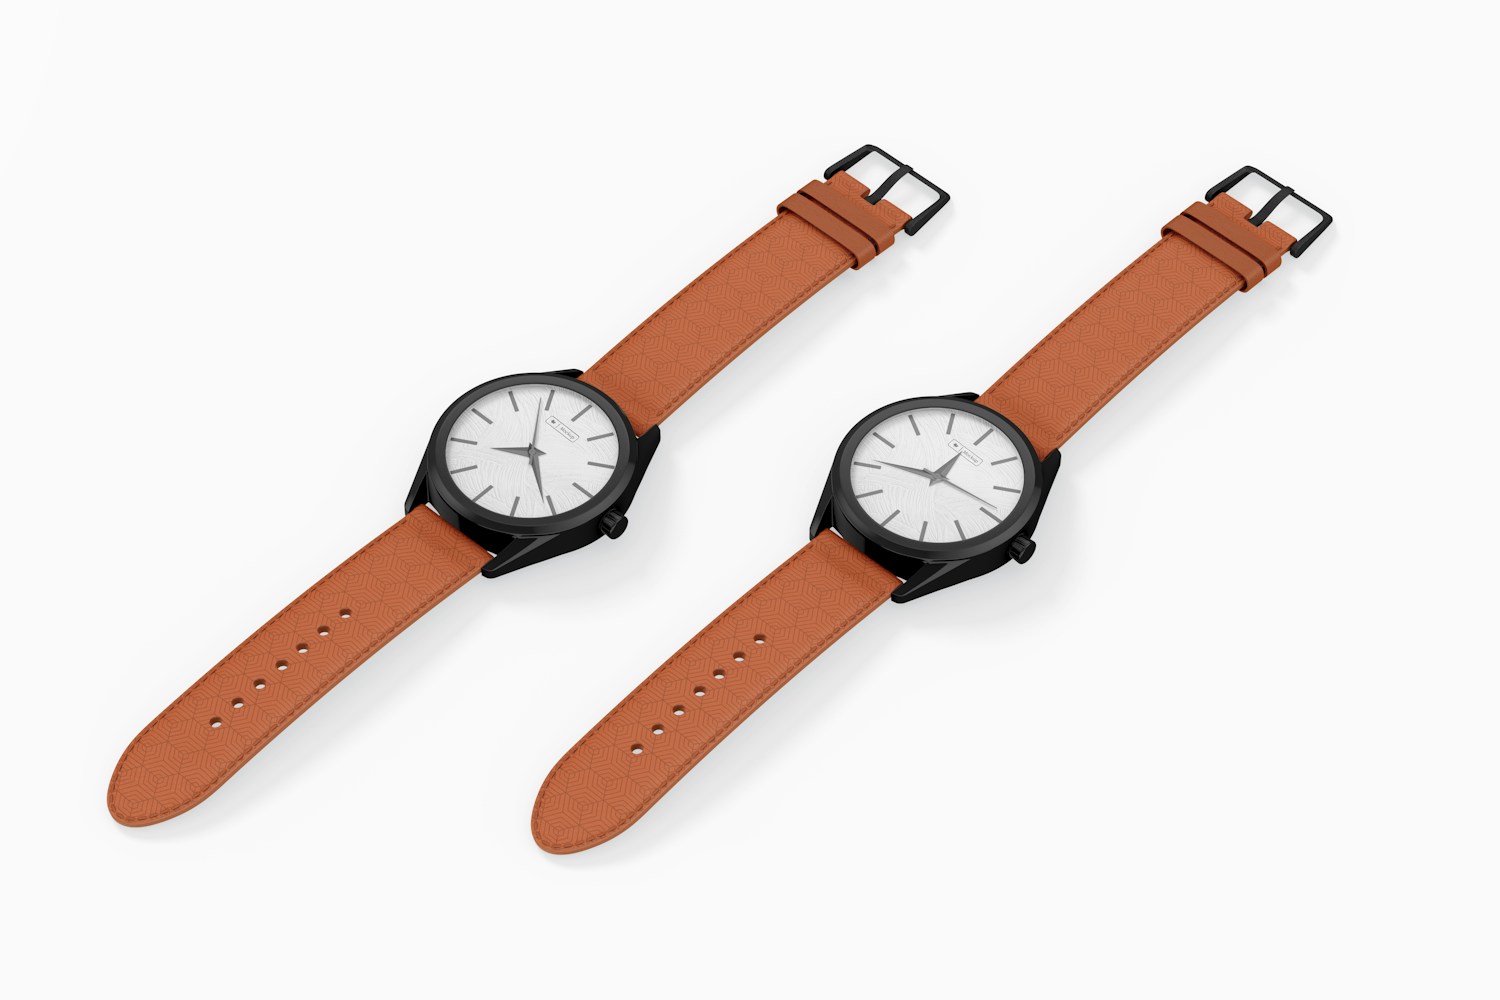 Watches with Leather Band Mockup